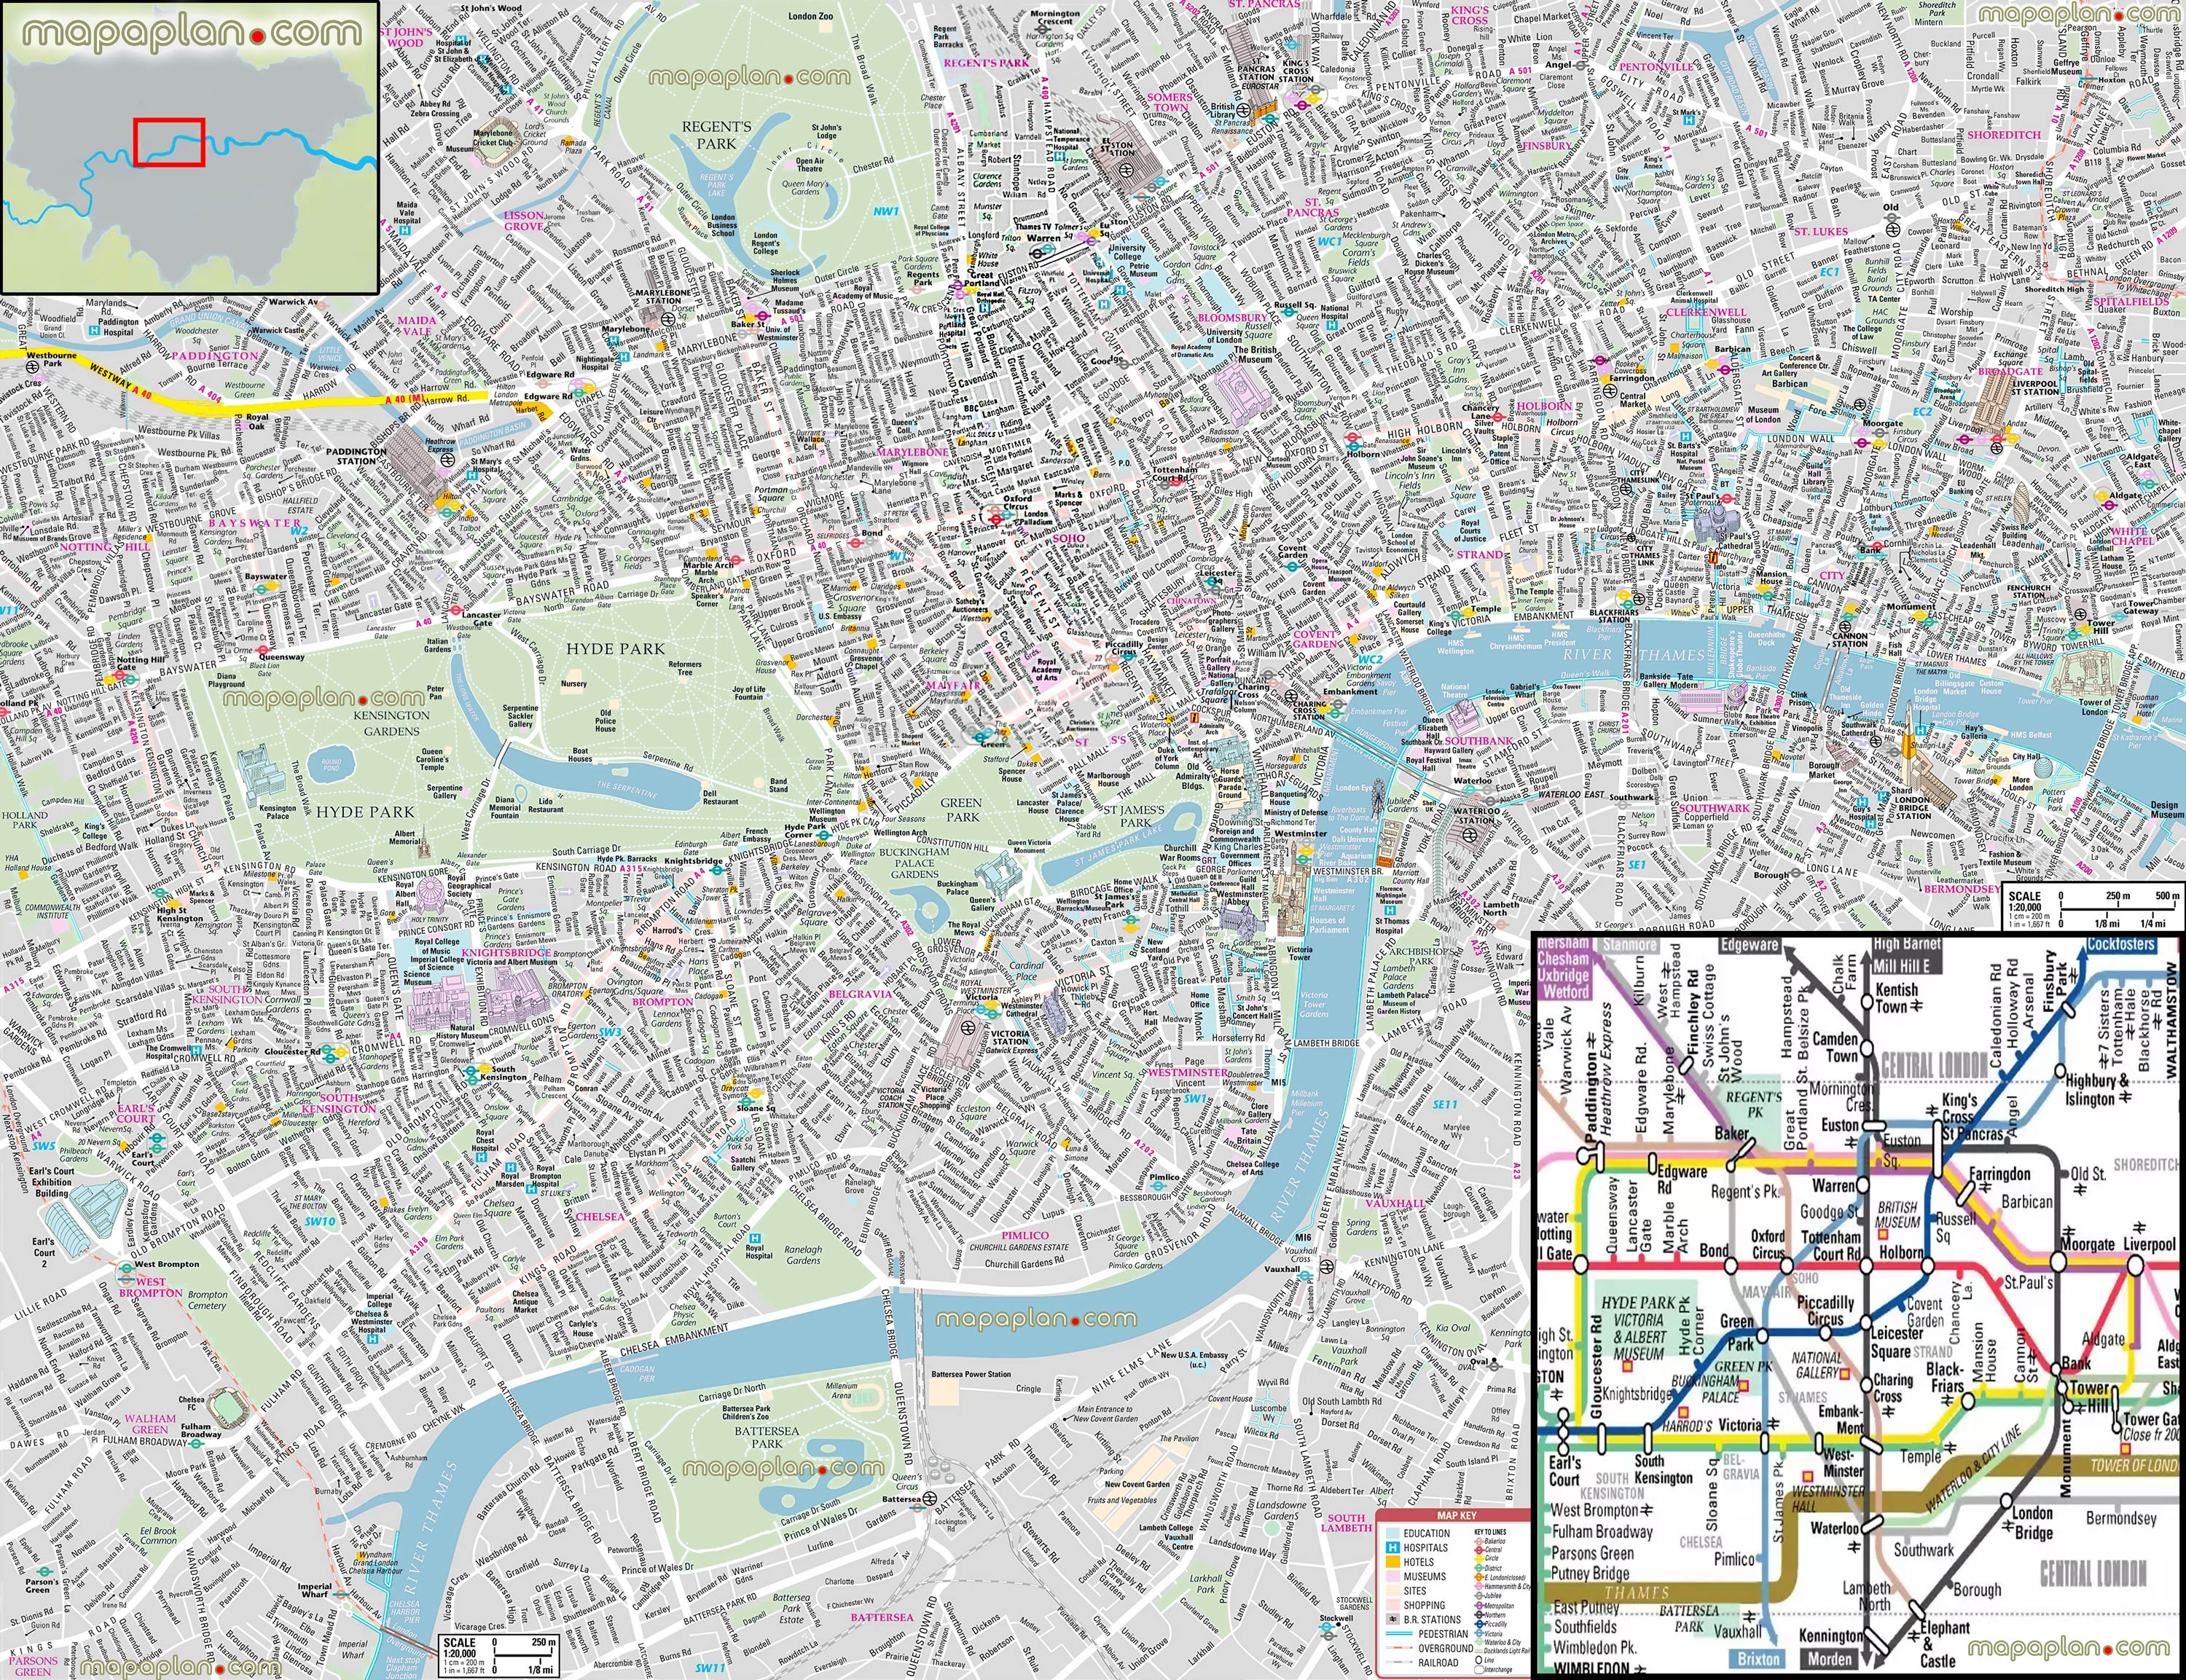 London Maps - Top Tourist Attractions - Free, Printable City Street - London Tourist Map Printable